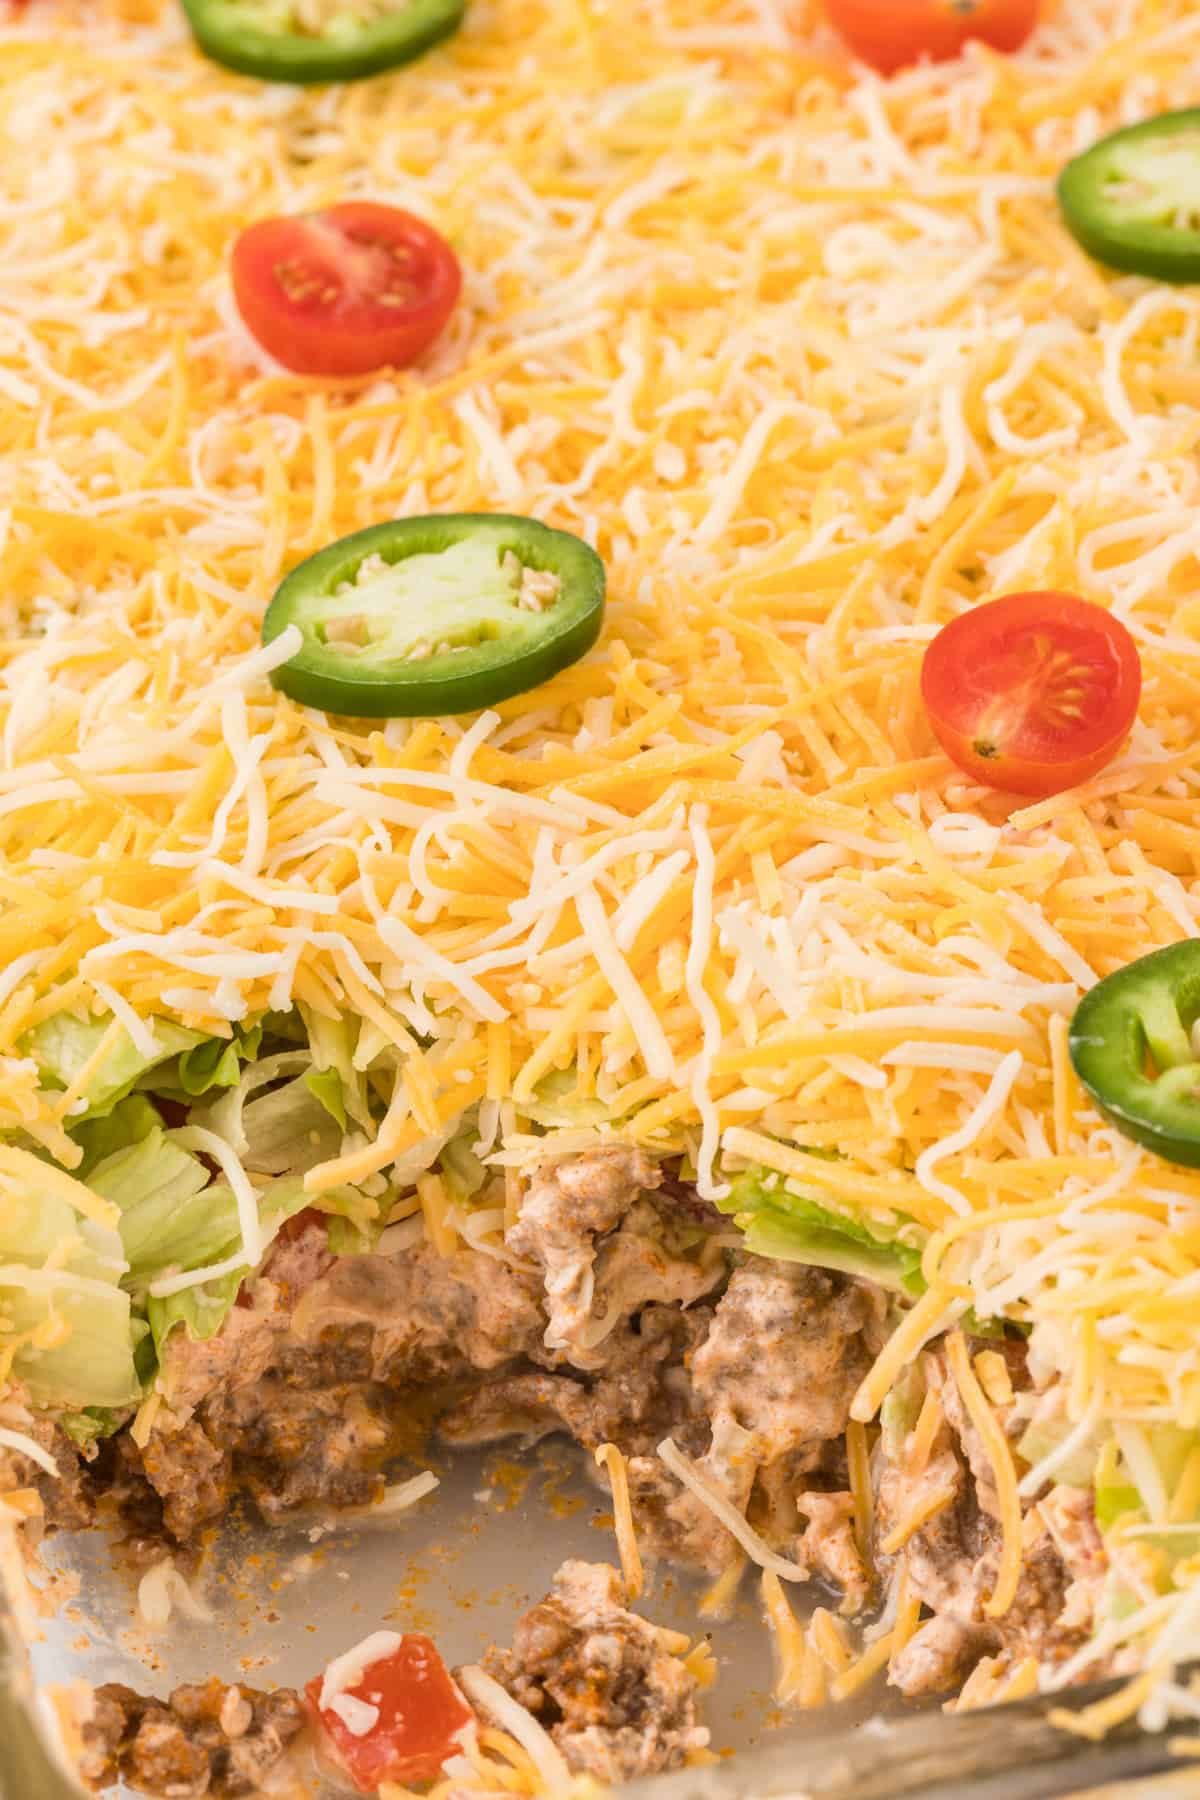 A casserole dish with layered taco dip - topped with shredded cheese, tomatoes, and jalapeno peppers.